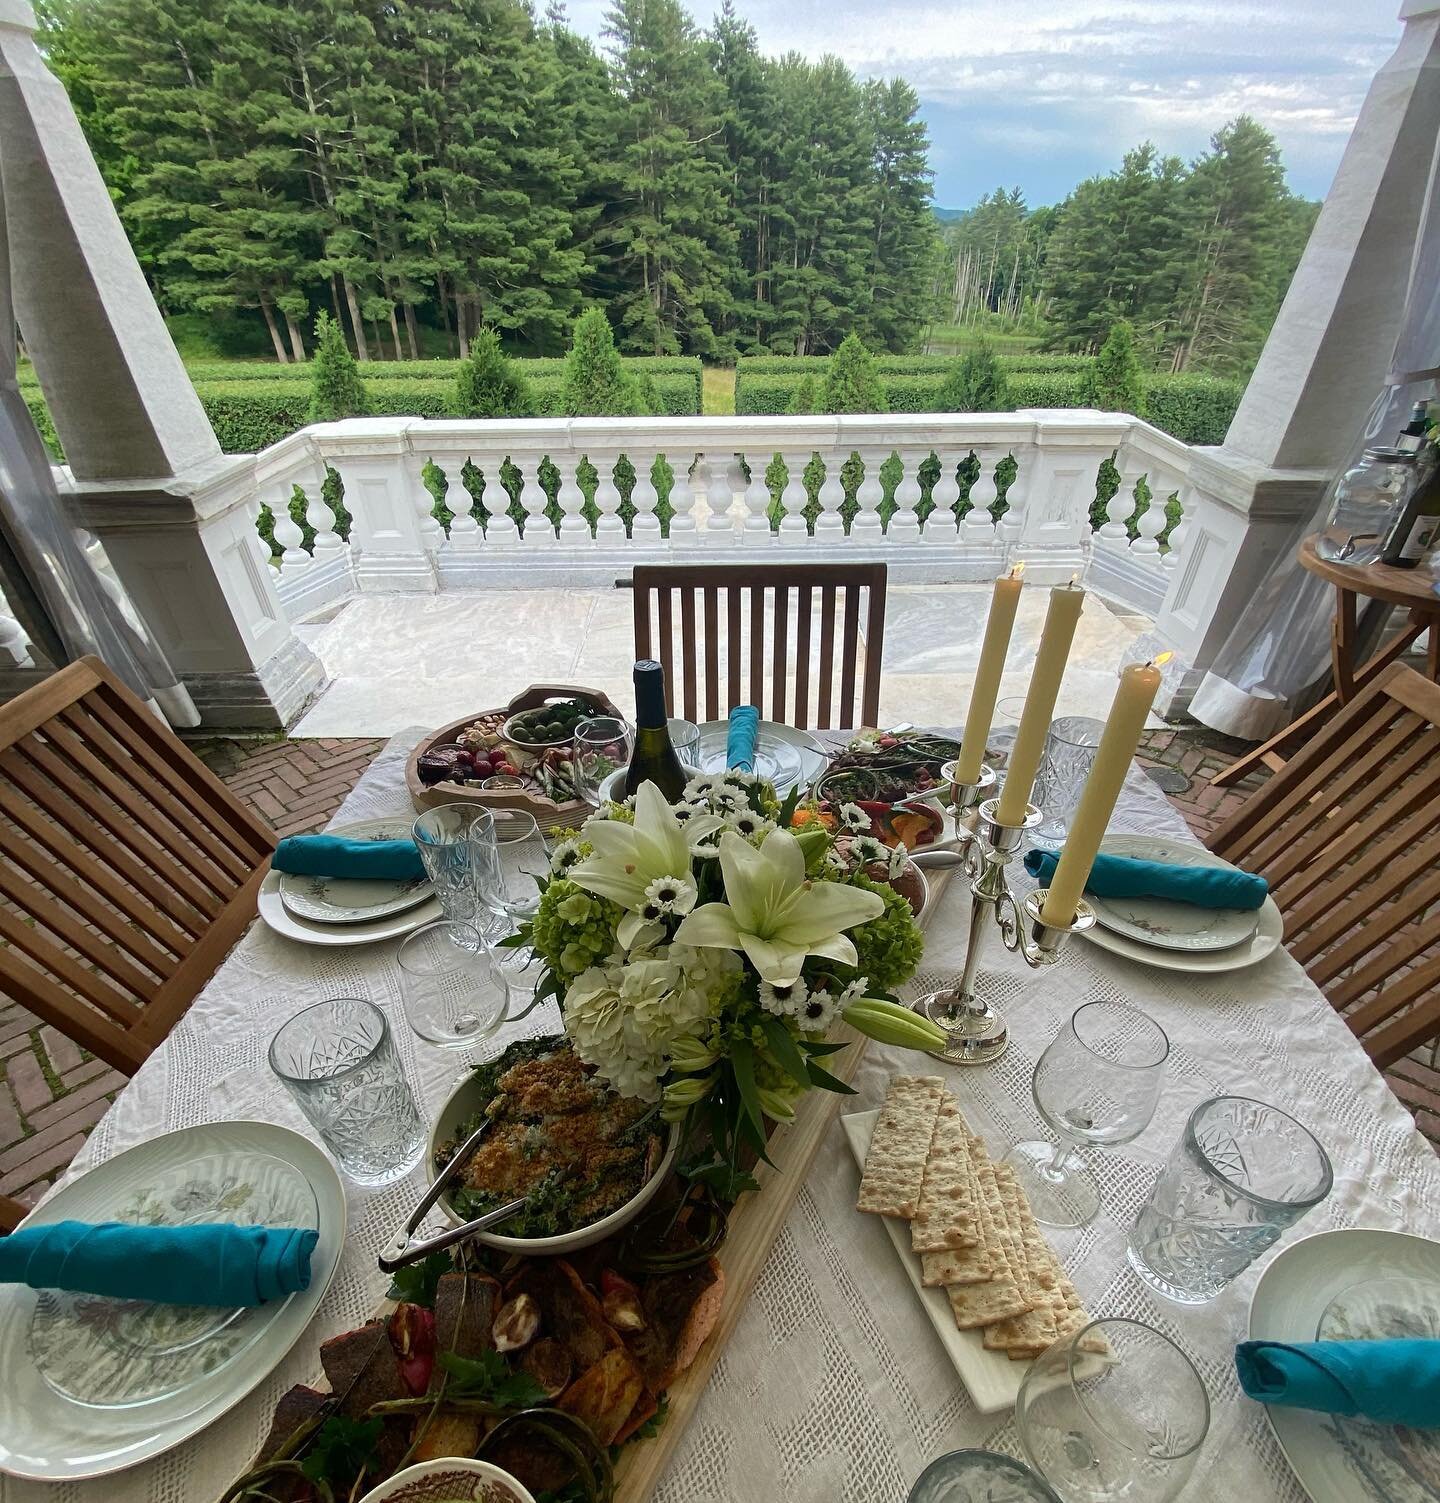 A dinner picnic with one of the best Berkshire views. @themountlenox #dinnerpicnic